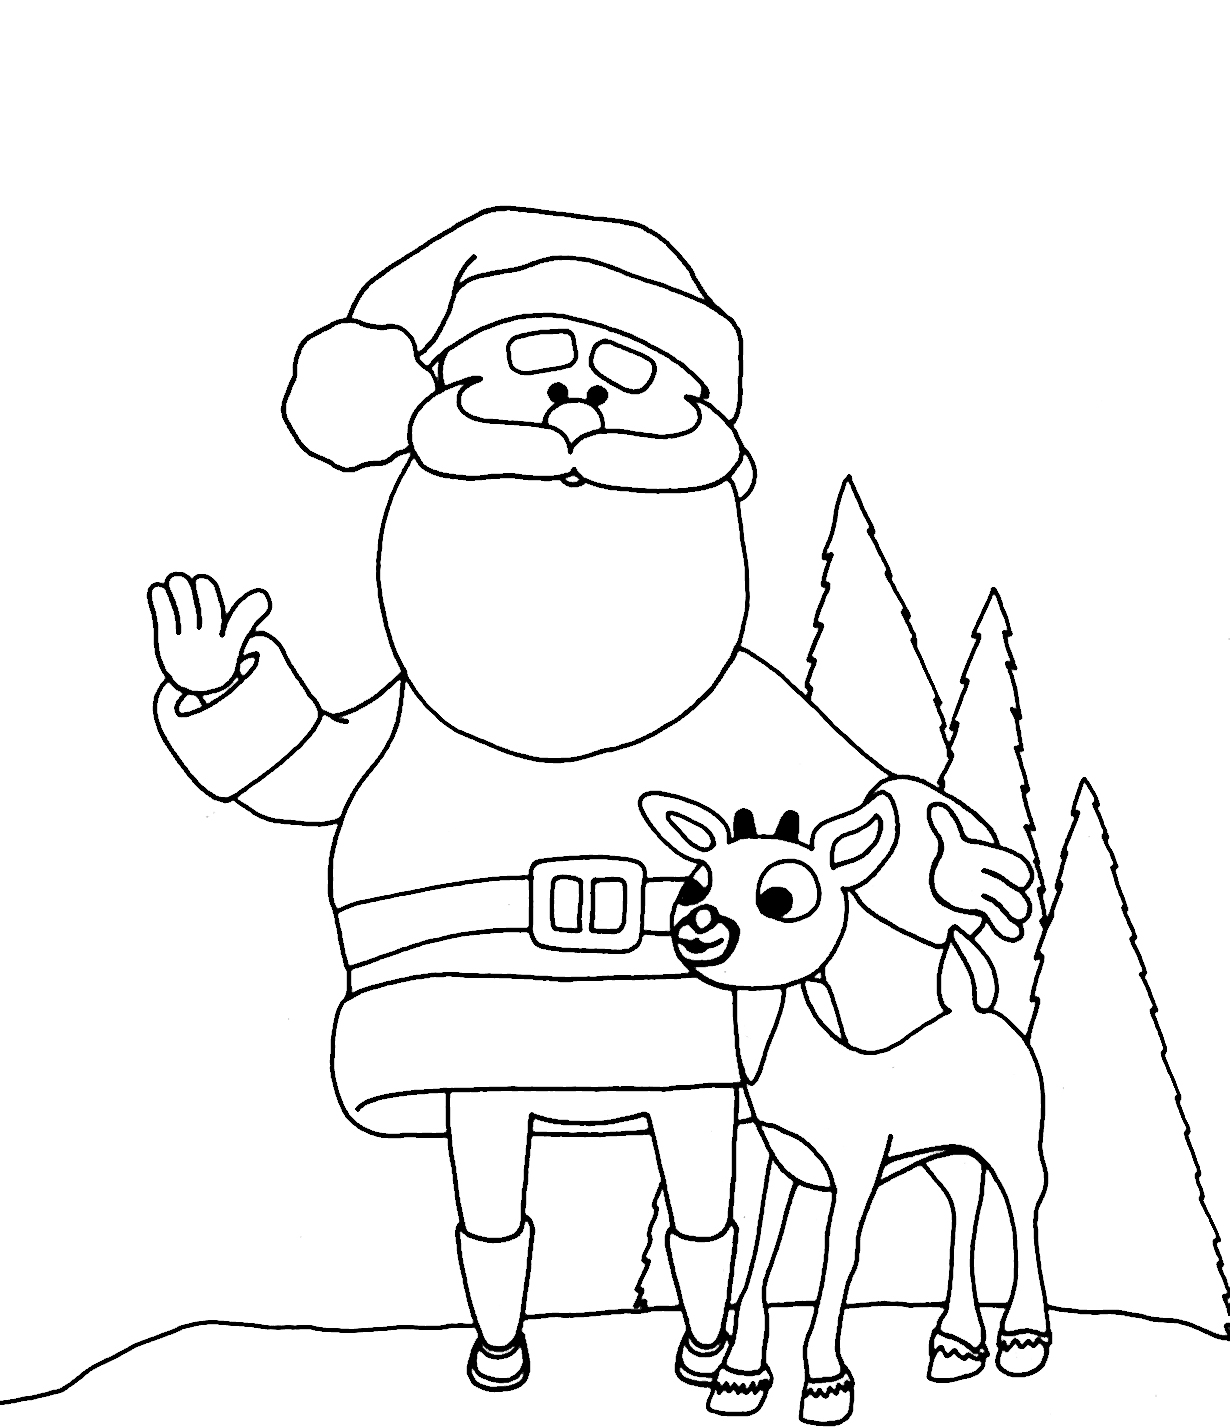 New Santa Coloring Pages Free with simple drawing